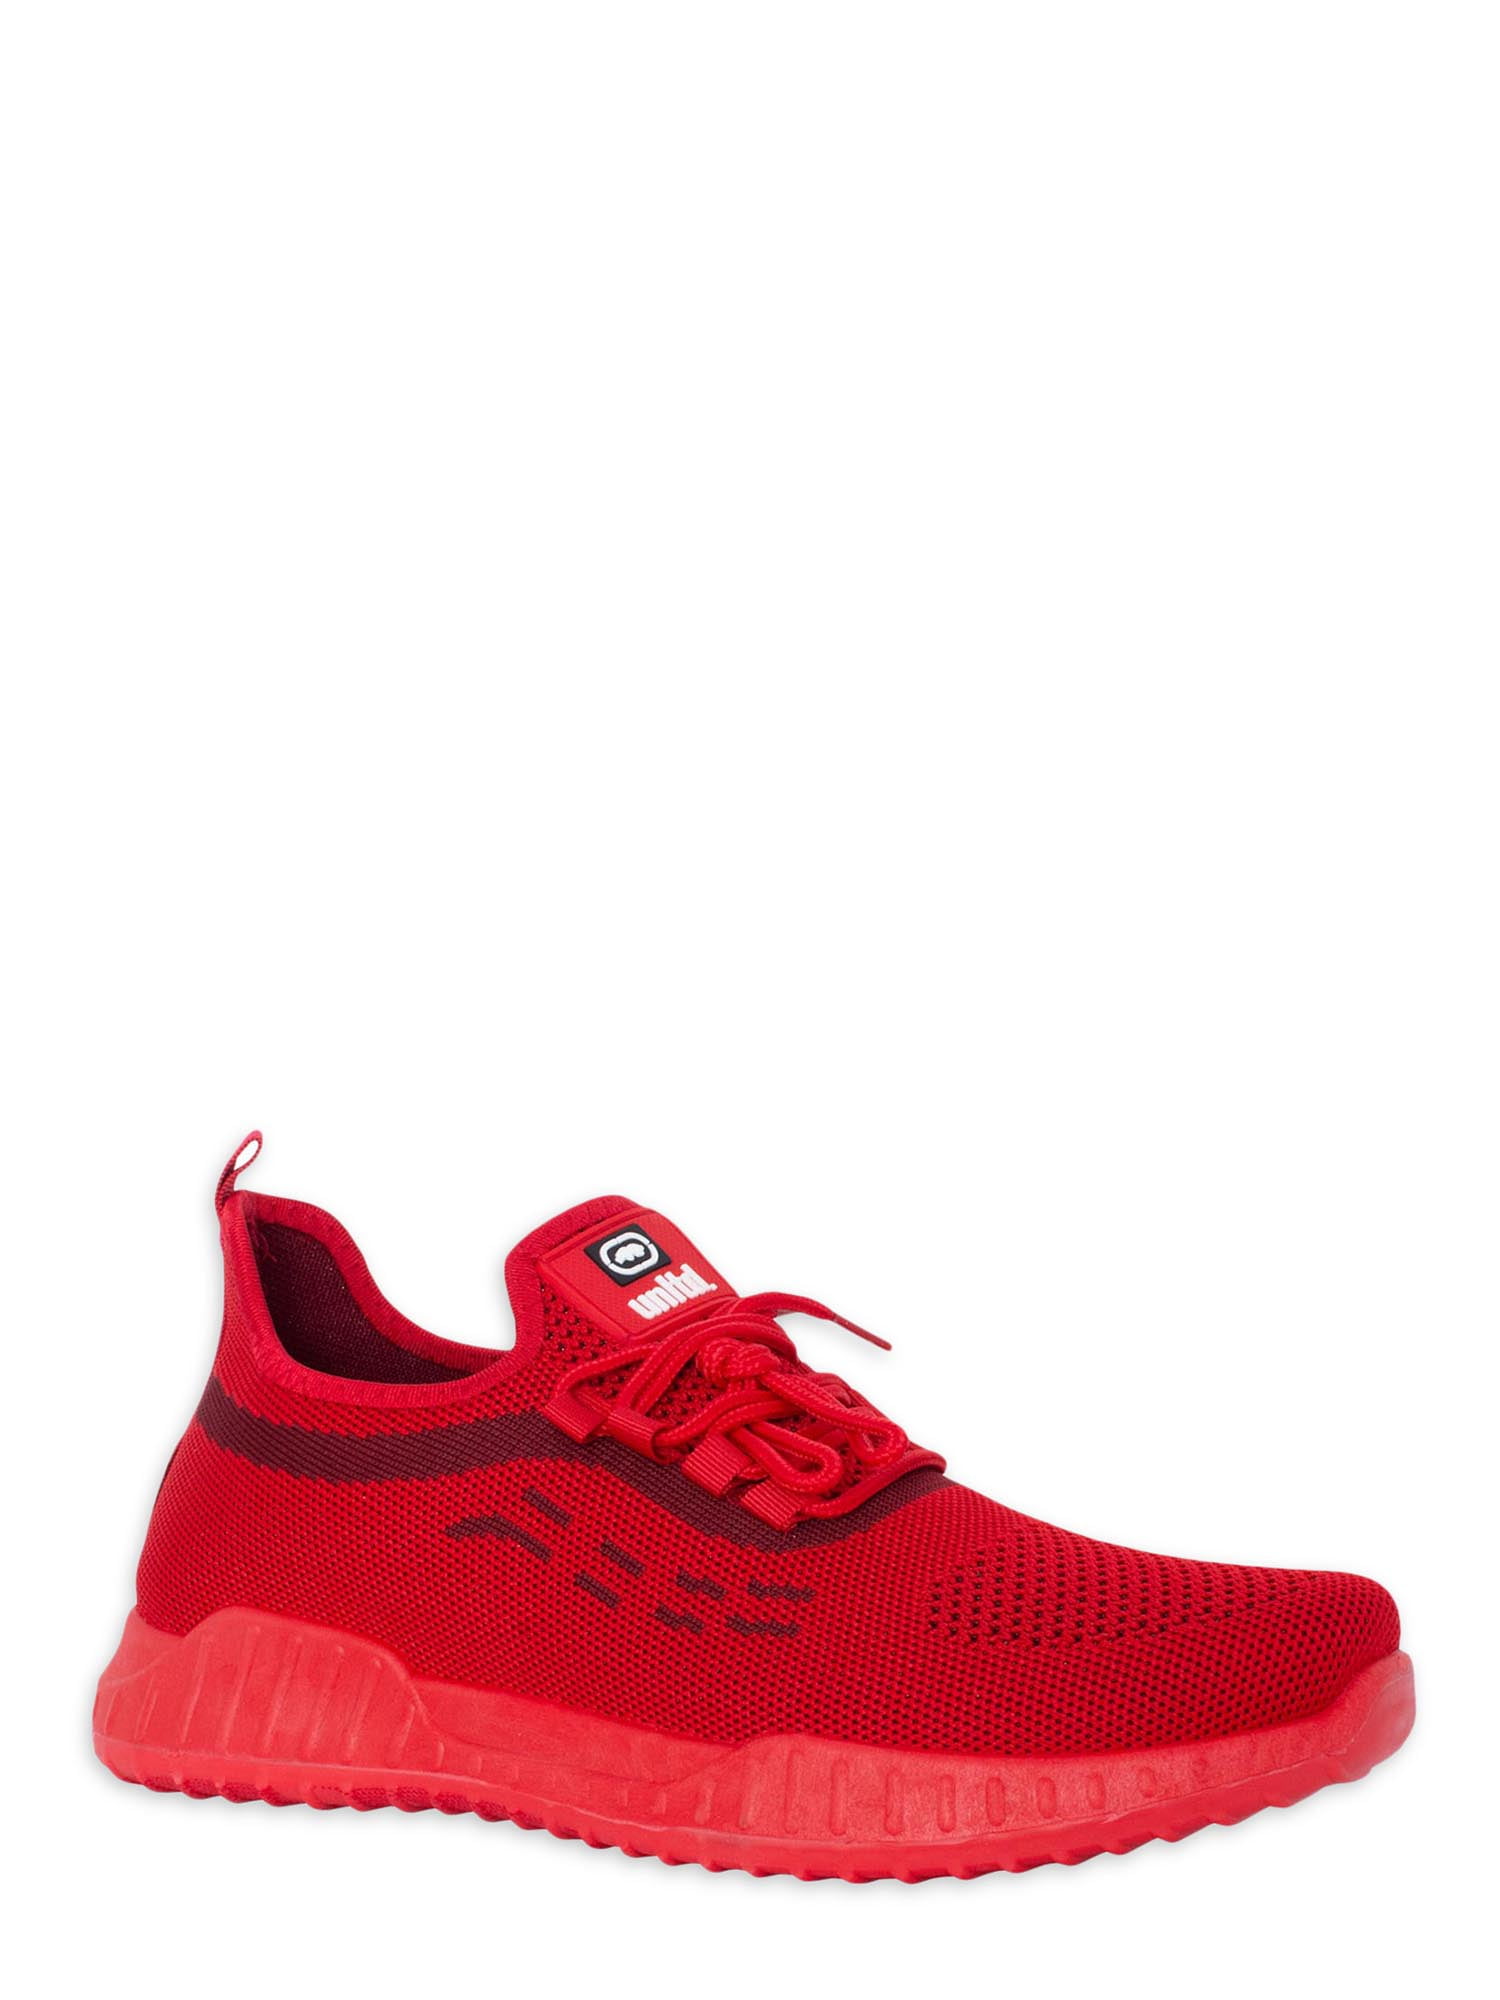 Shoes Sneakers Lace-Up Sneakers Vans Lace-Up Sneaker red casual look 